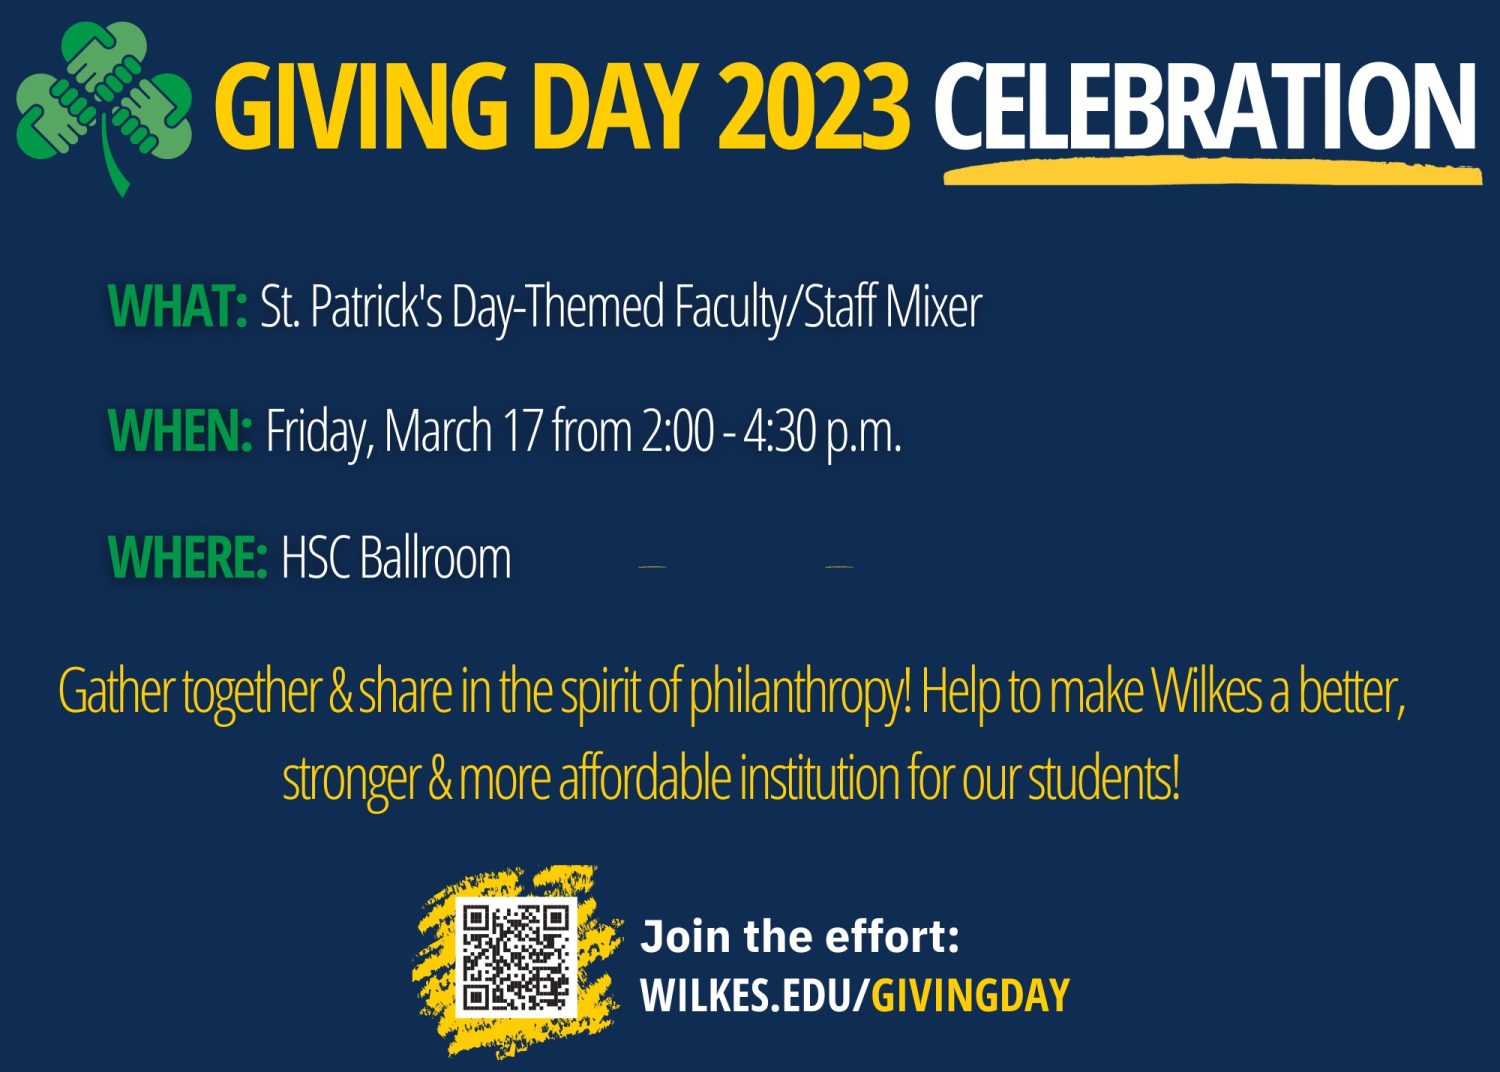 Giving Day flyer 
St. Patrick's Day faculty/staff mixer from 2-4:30 p.m. in the Ballroom on Friday, March 17